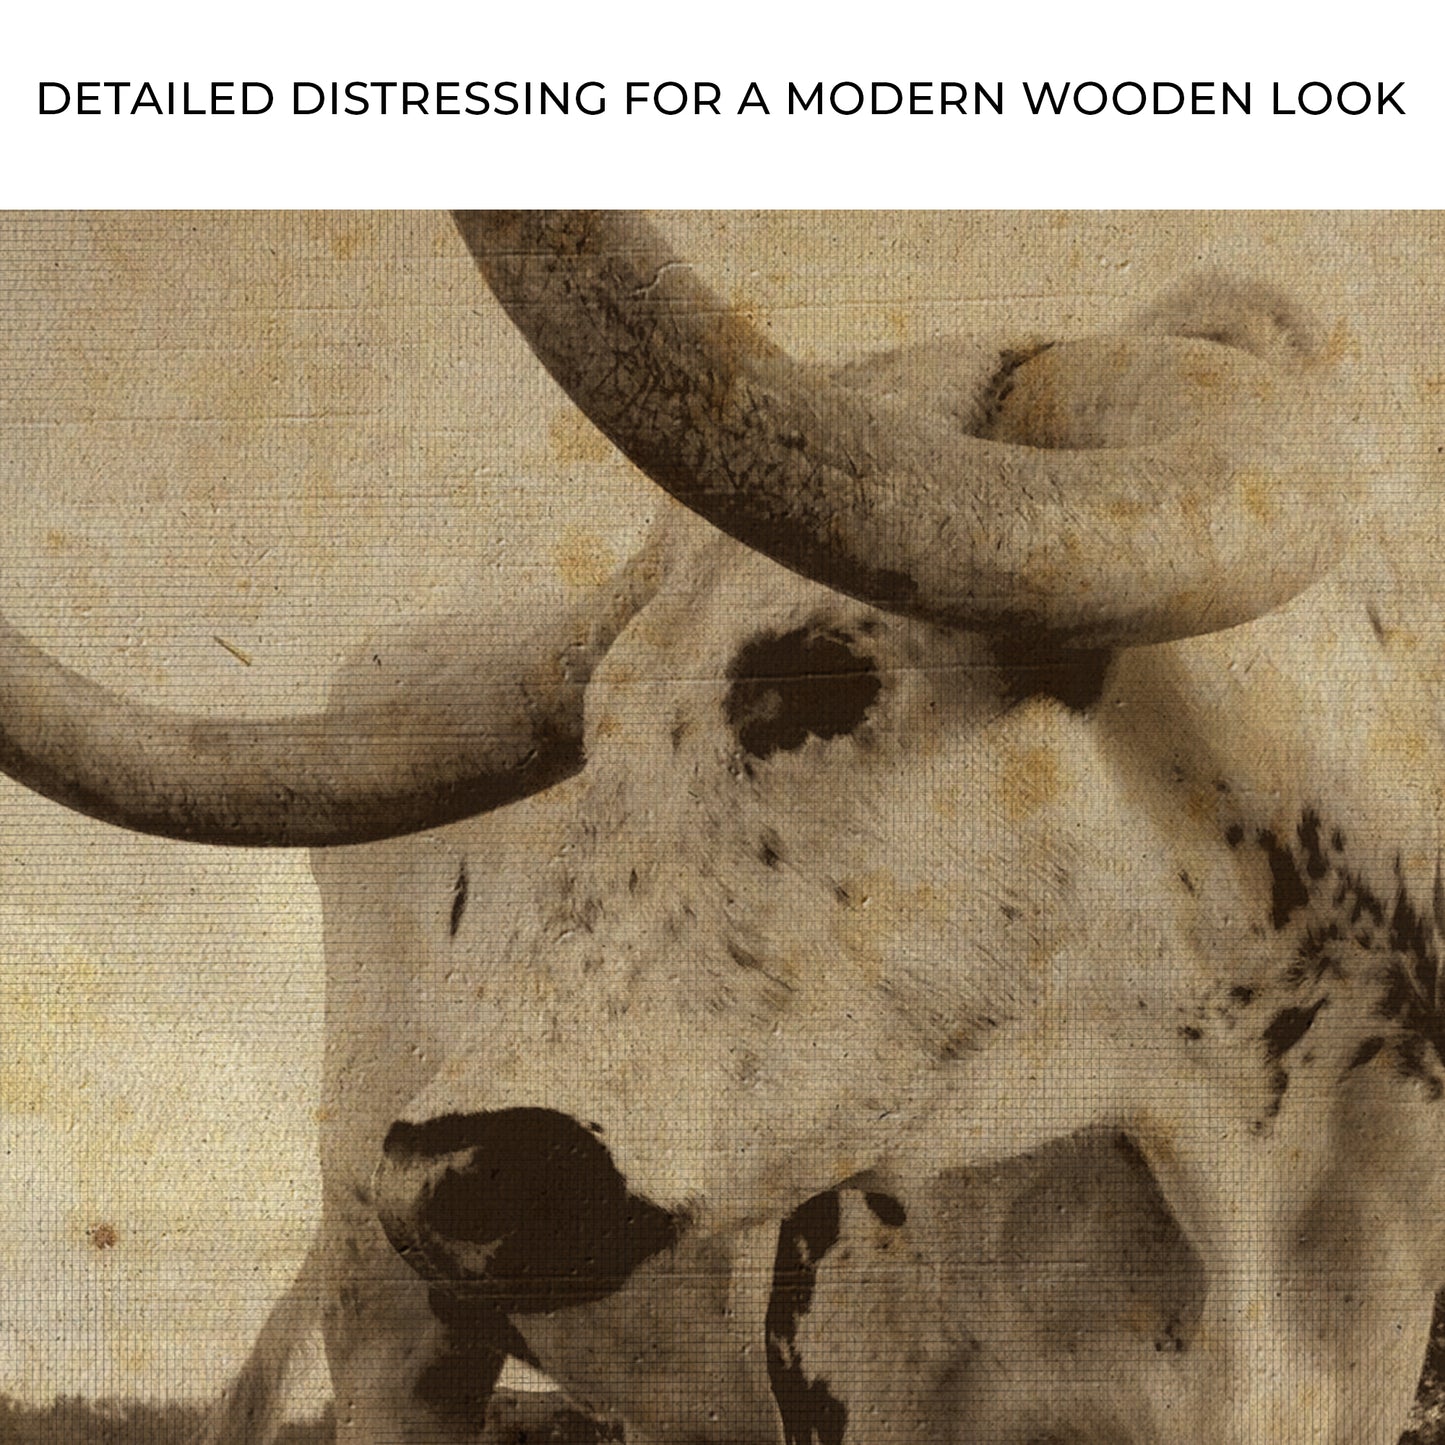 Vintage Longhorn Cattle Canvas Wall Art Zoom - Image by Tailored Canvases